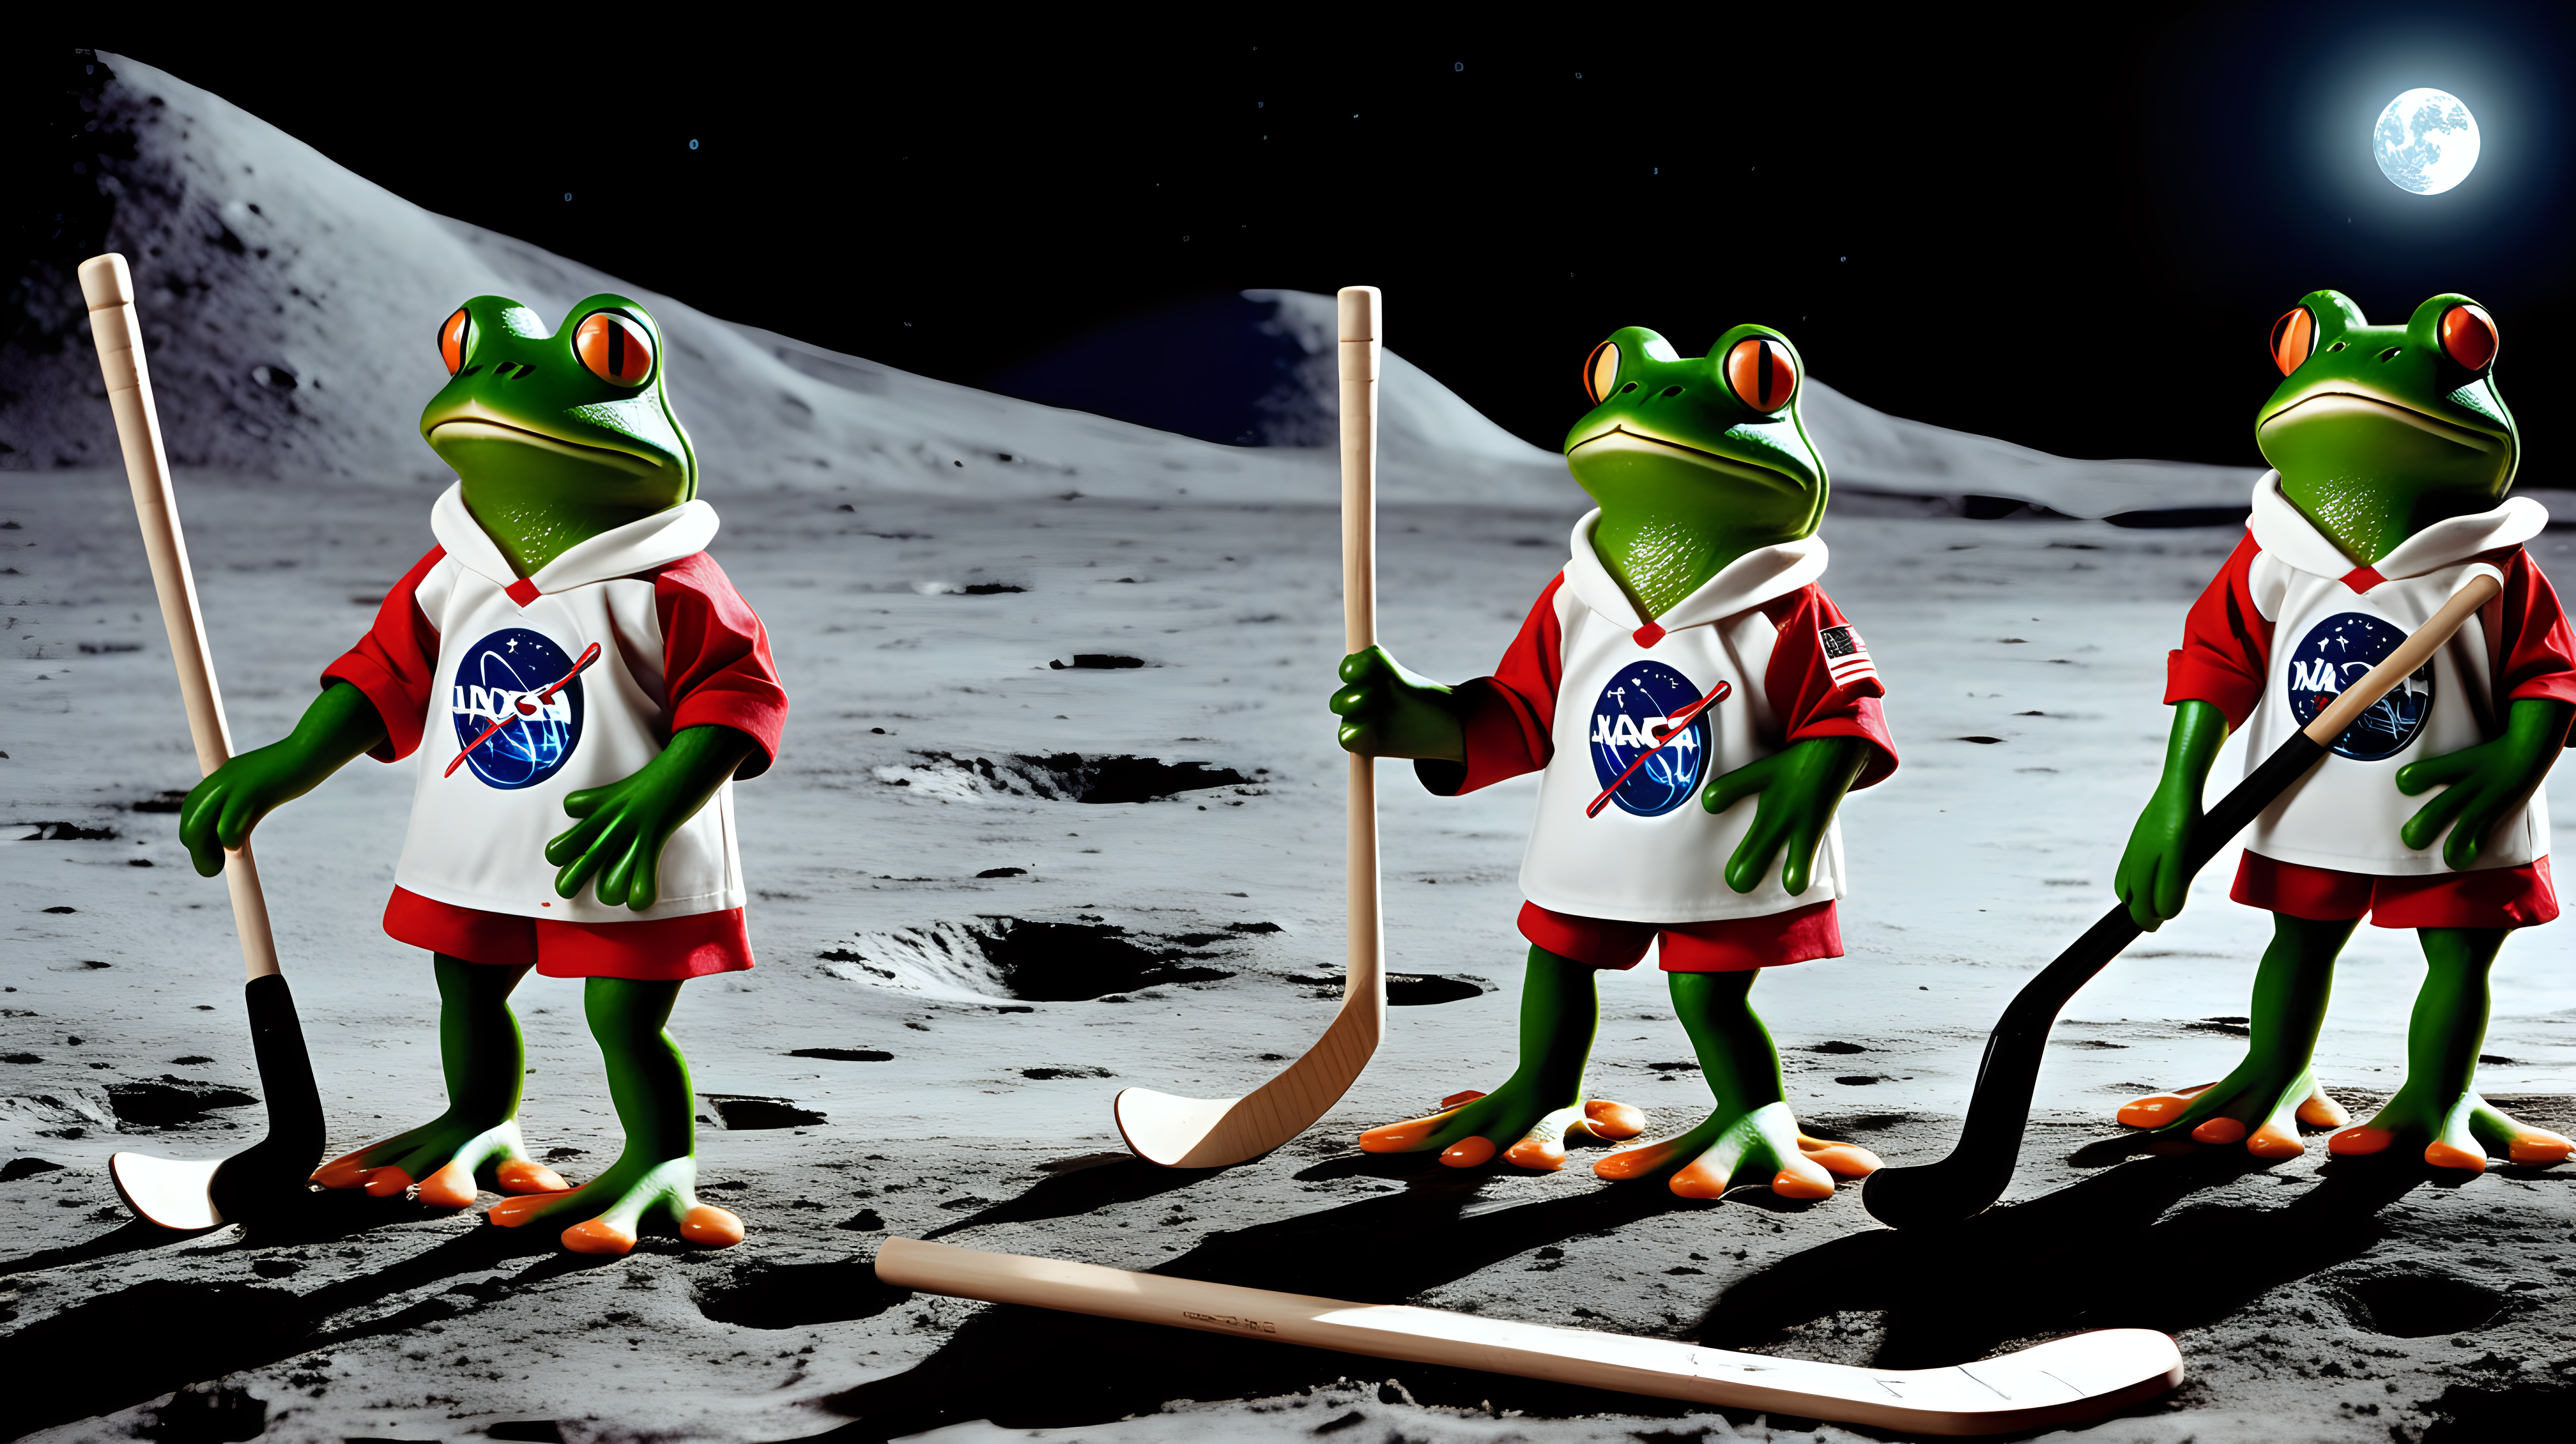 frogs dressed in uniforms playing hockey on the